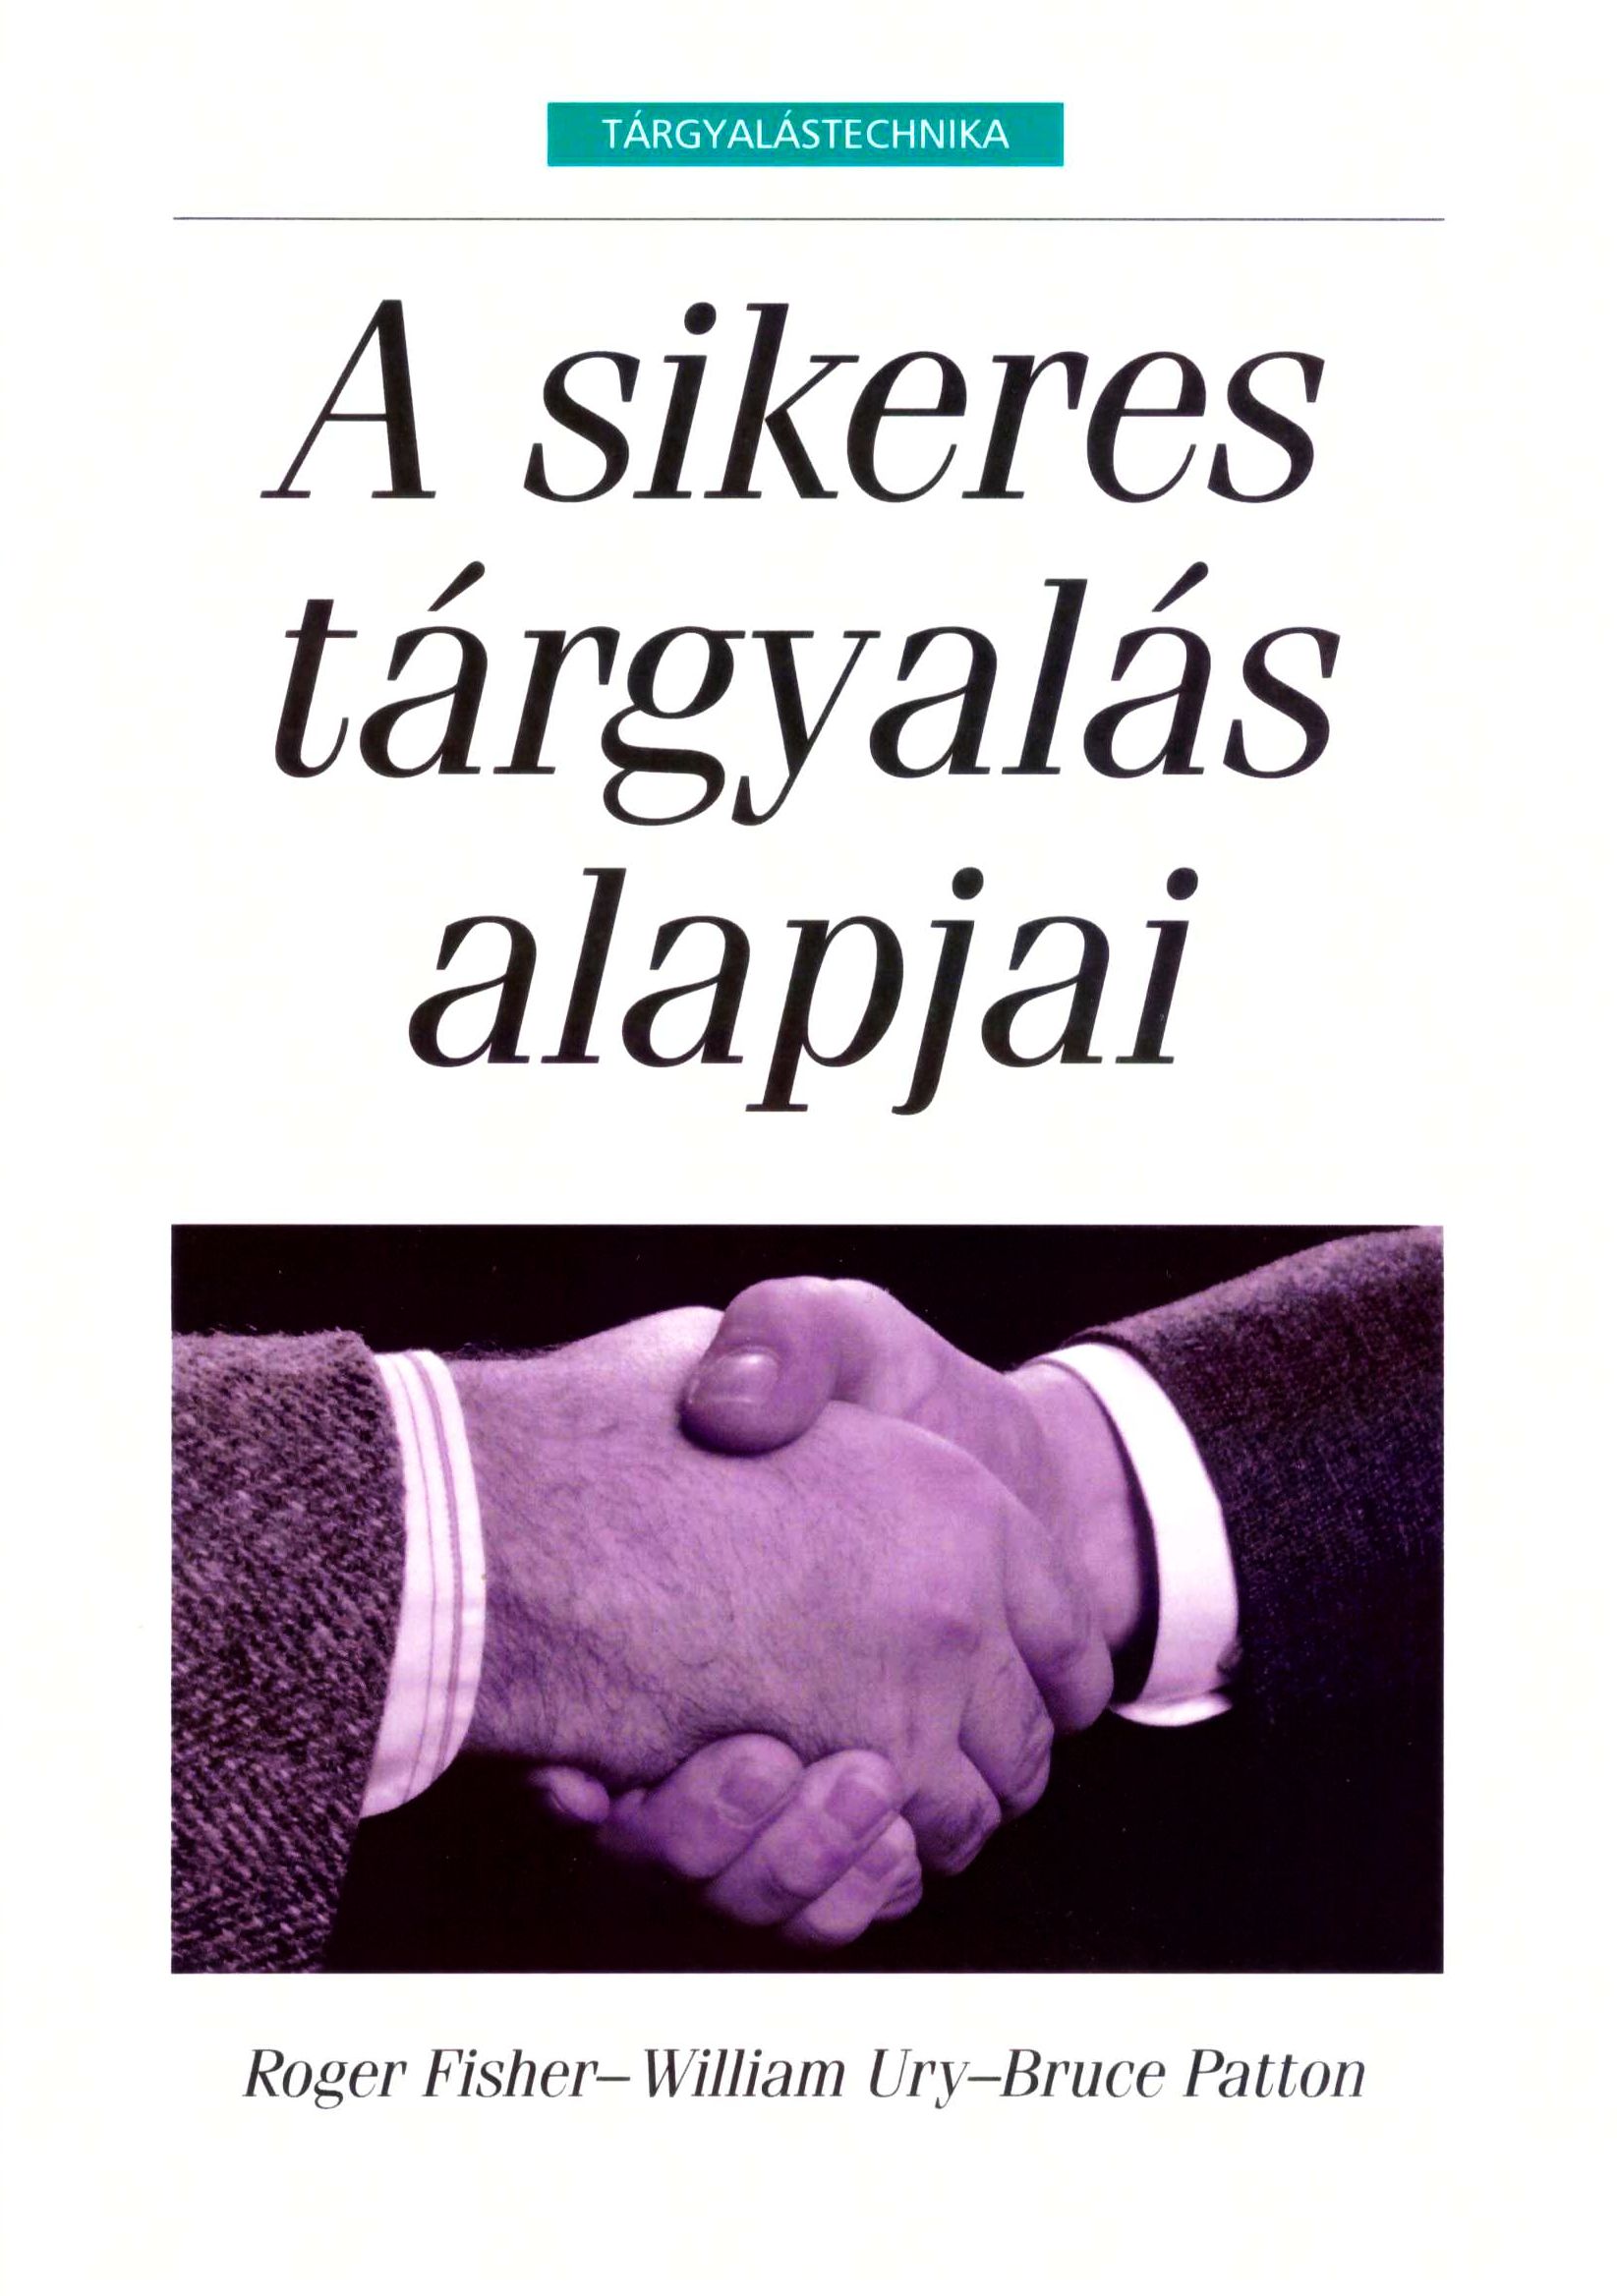 Roger Fisher, William Ury, Bruce Patton: A sikeres tárgyalás alapjai